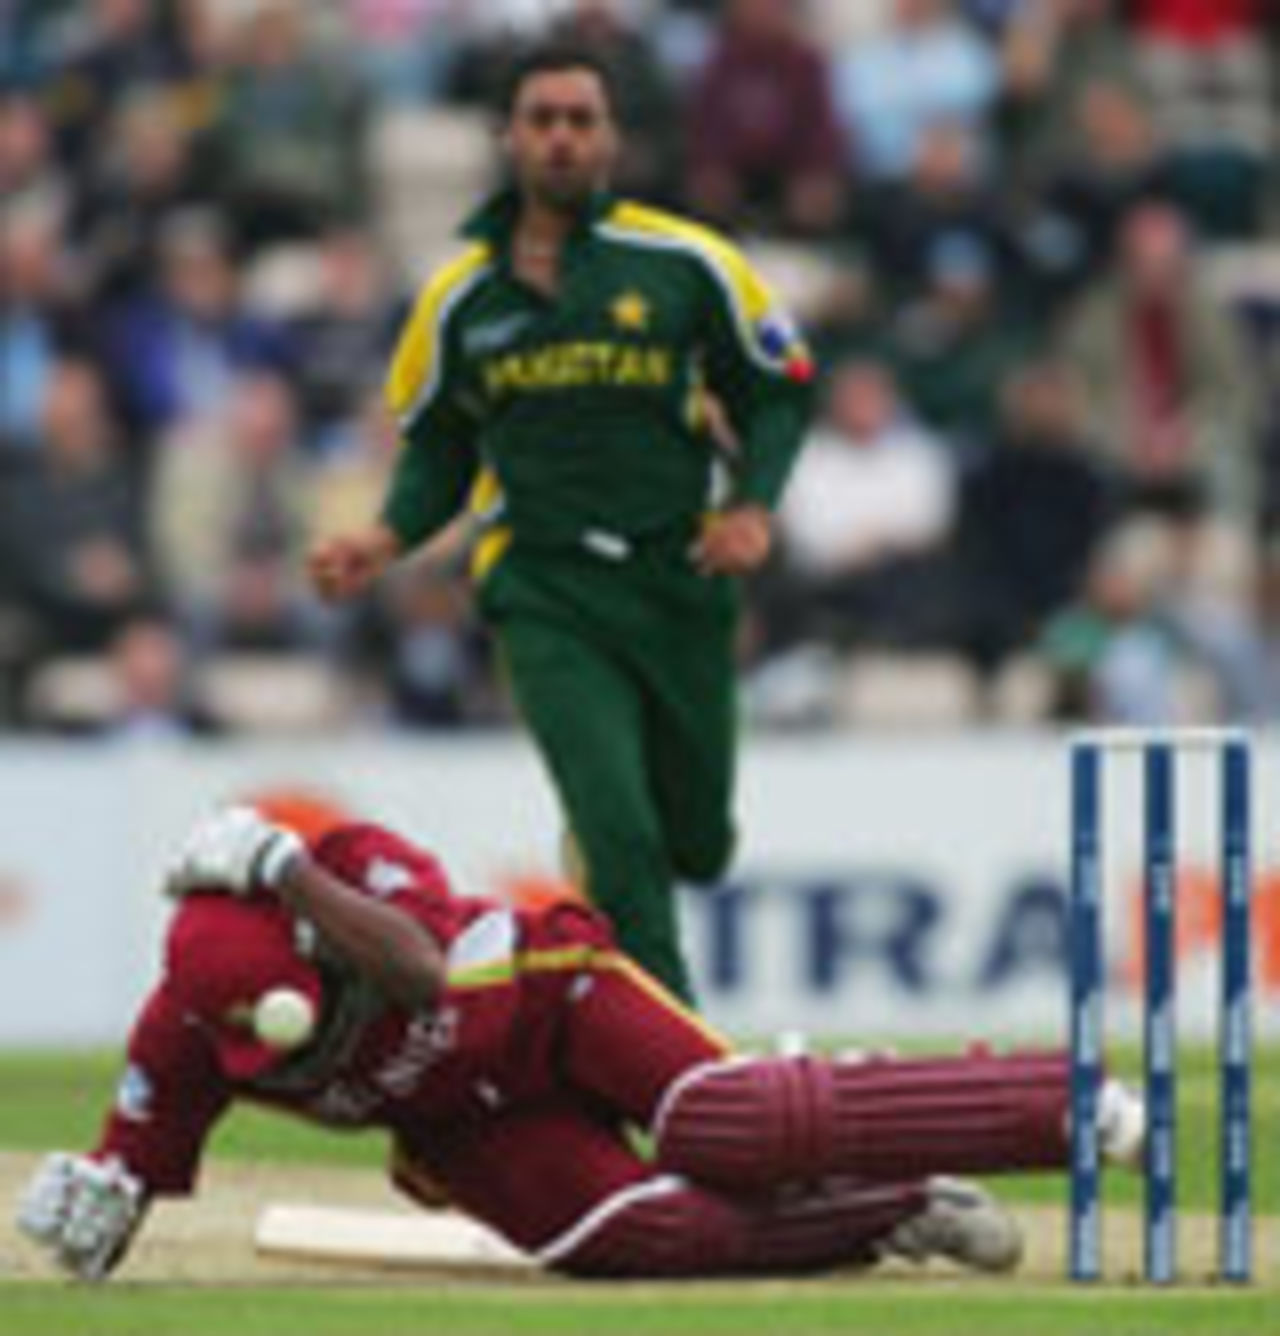 Brian Lara is felled by a sharp bouncer from Shoaib Akhtar, West Indies v Pakistan, ICC Champions Trophy, September 22 2004